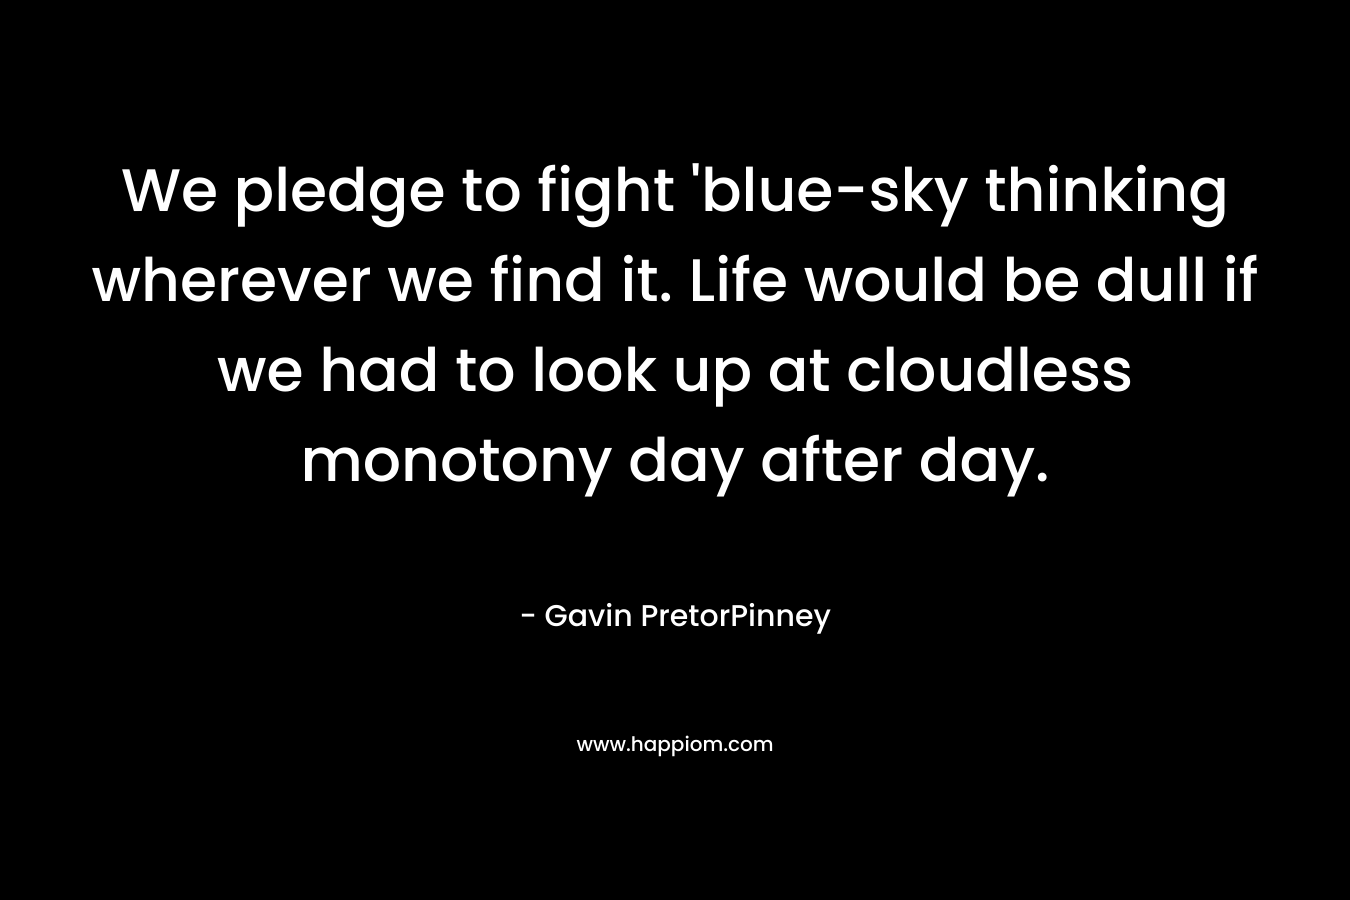 We pledge to fight ‘blue-sky thinking wherever we find it. Life would be dull if we had to look up at cloudless monotony day after day. – Gavin PretorPinney